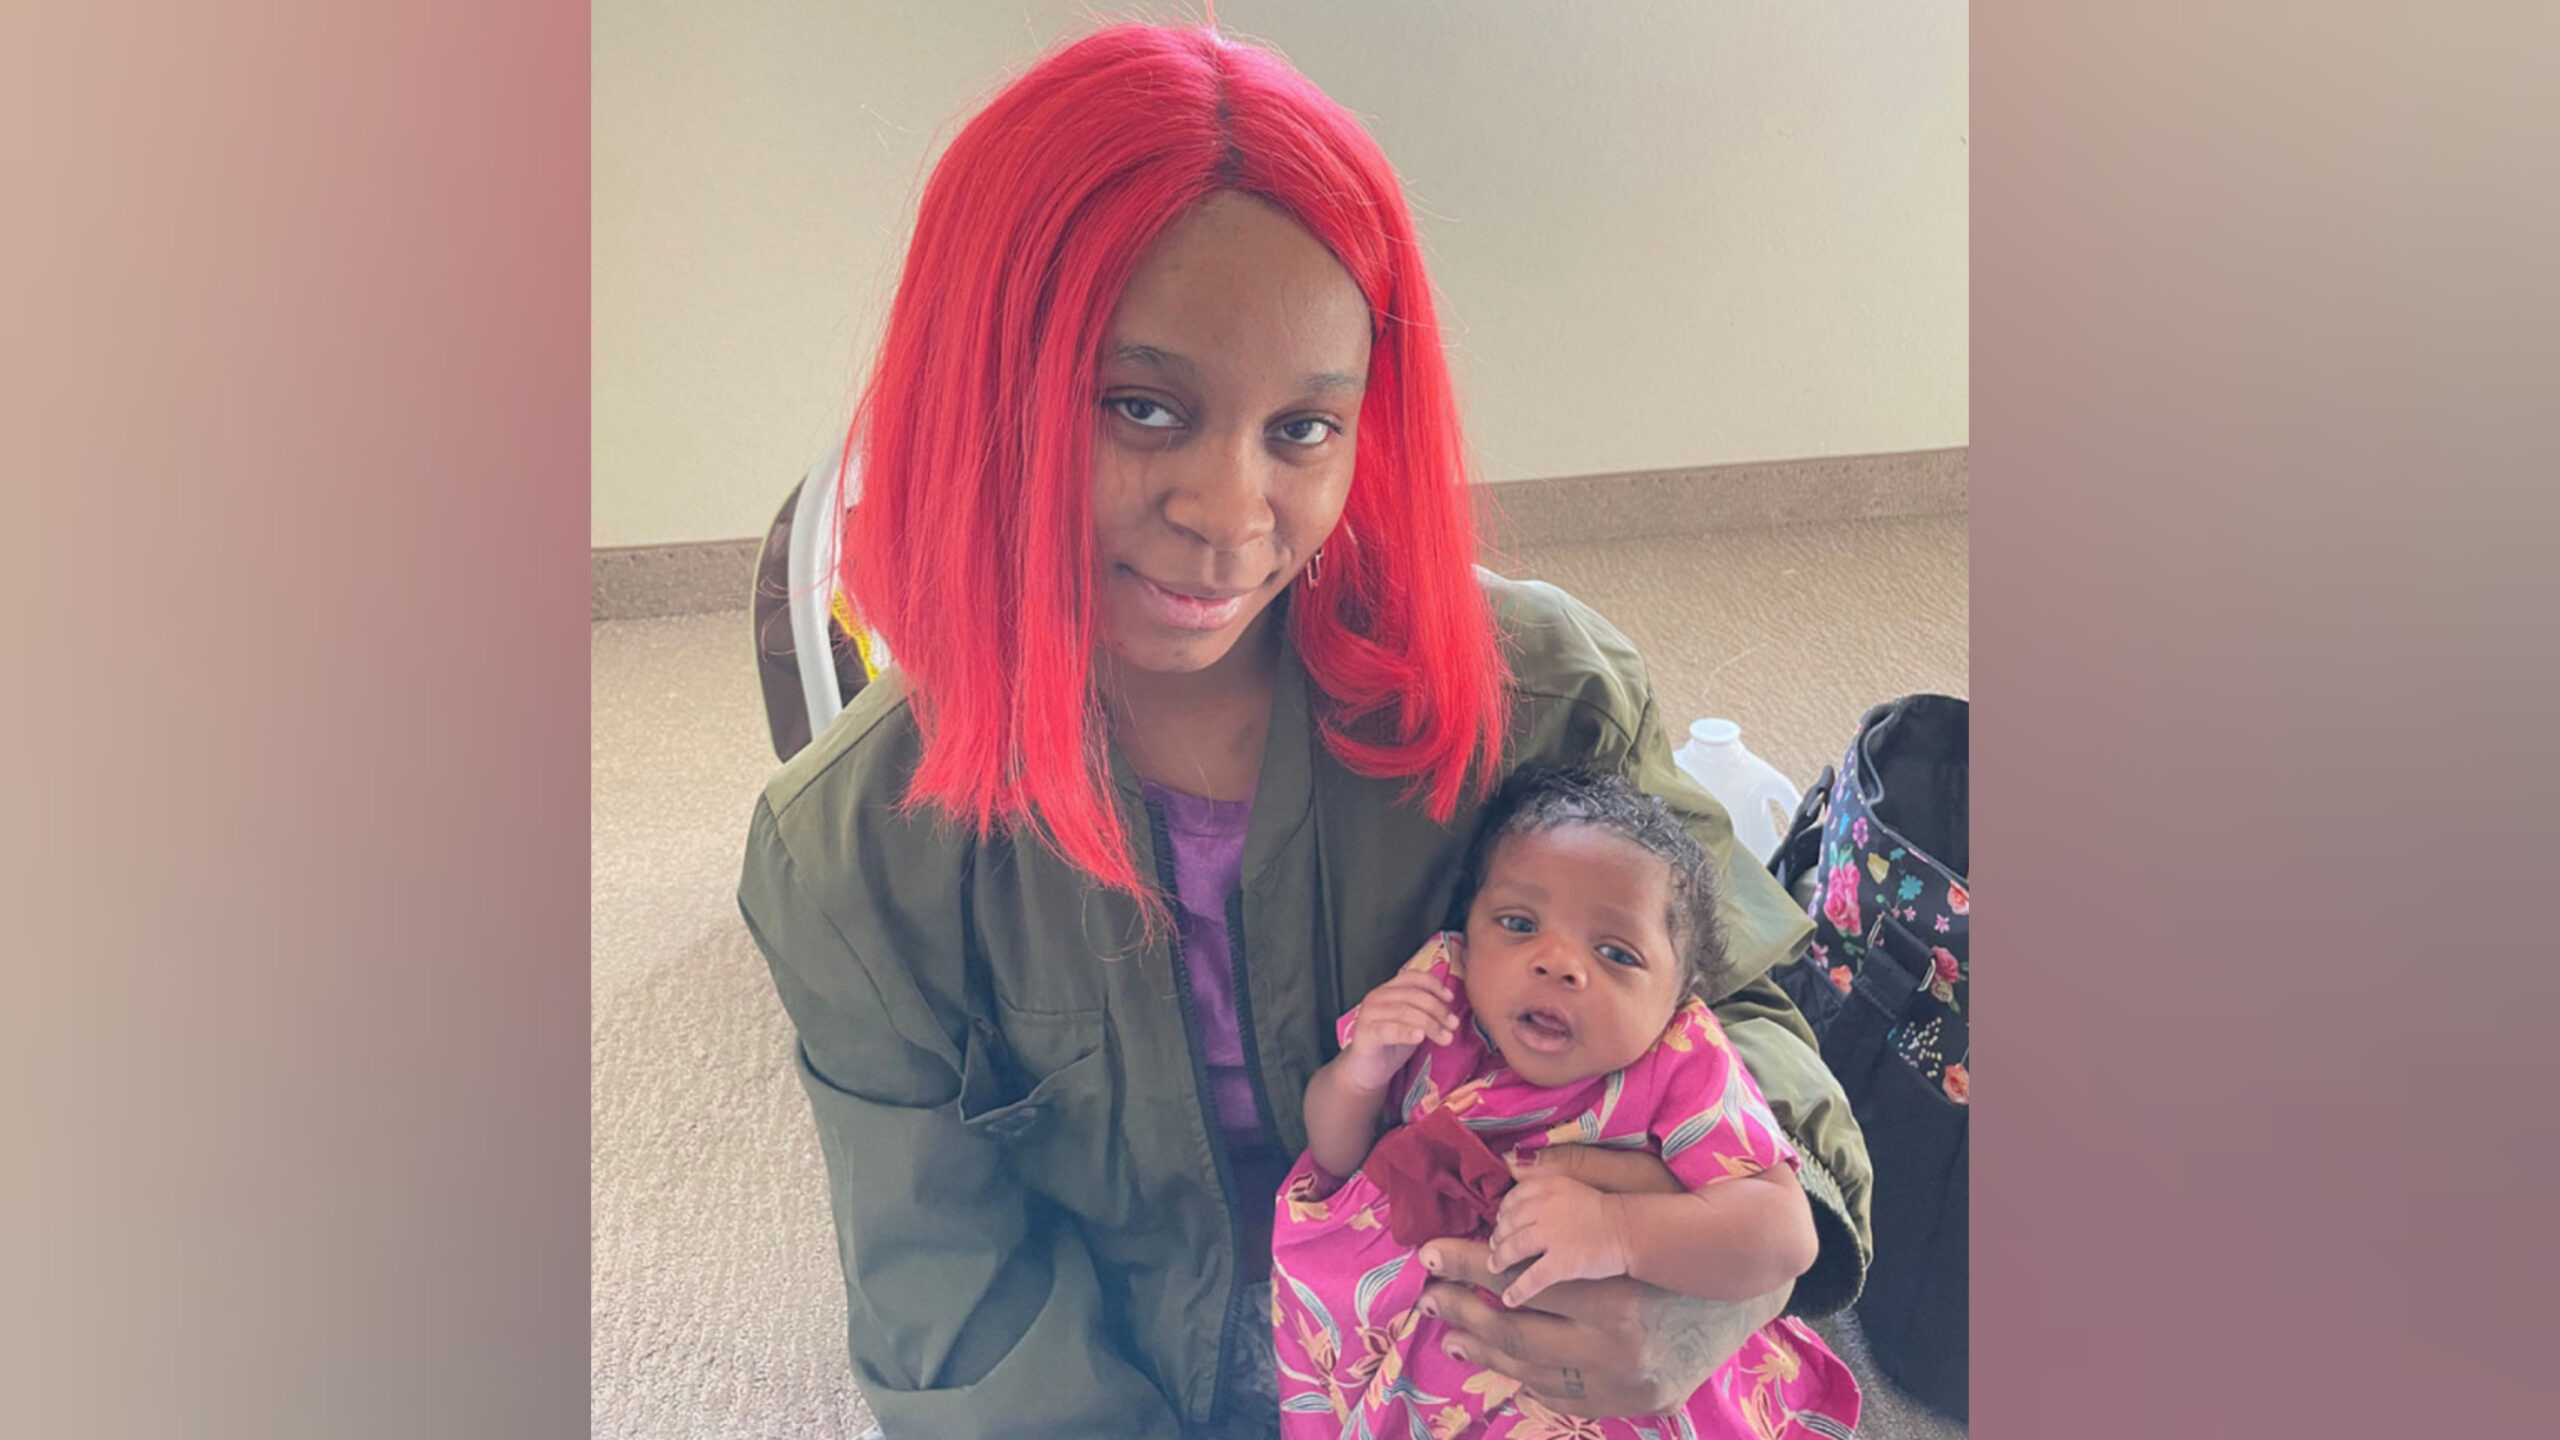 Police in Calhoun County, Michigan are searching for a missing baby who may be in danger after her mother did not surrender her over to CPS.